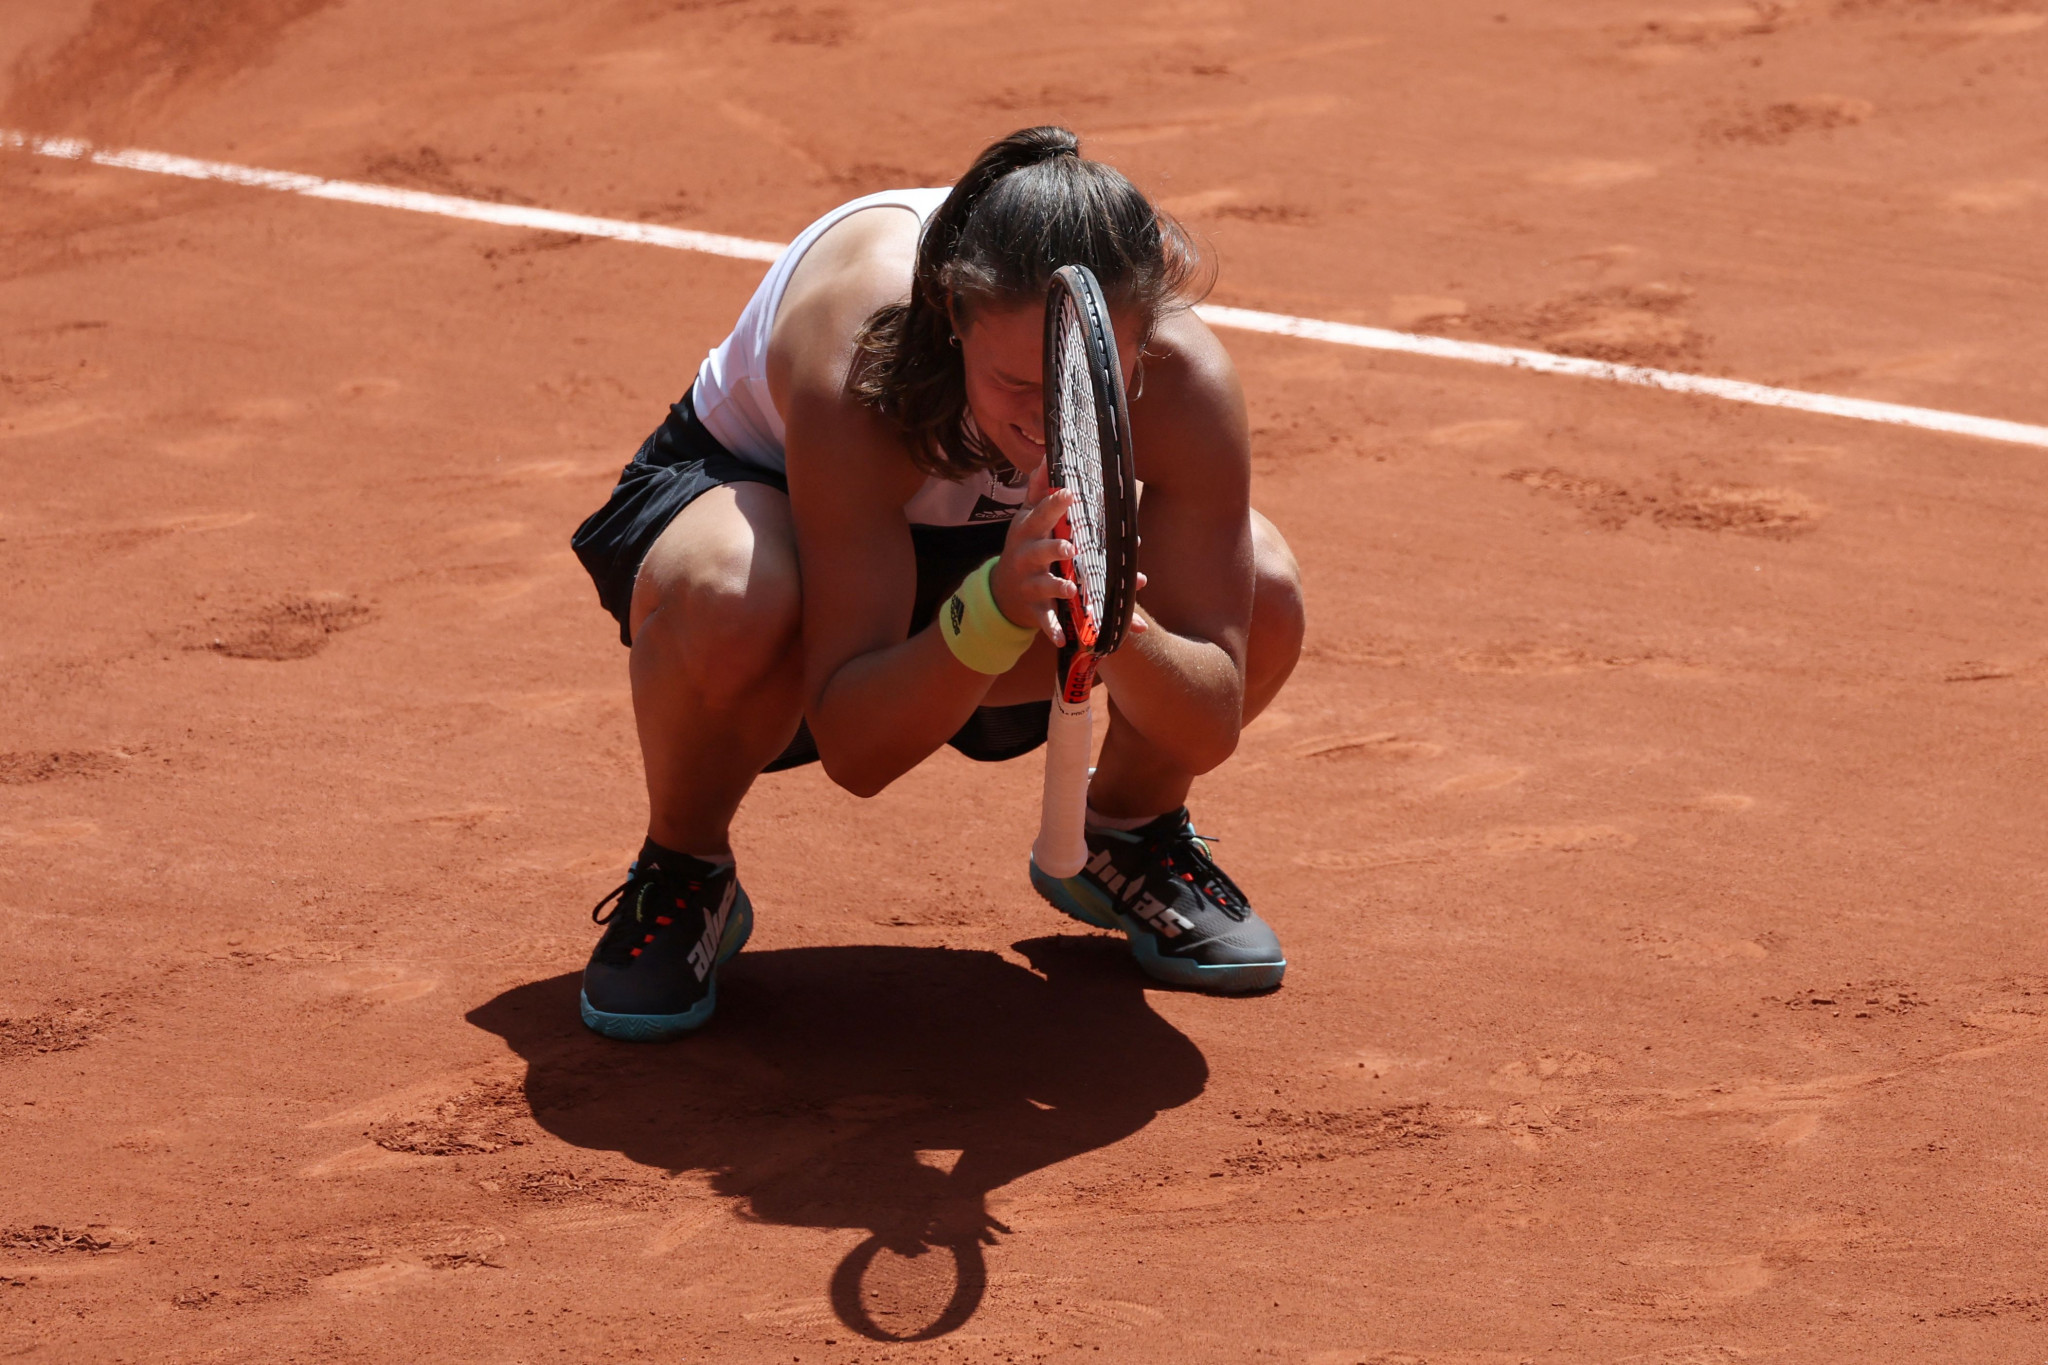 Daria Kasatkina could not control her emotions after reaching the semi-finals of the French Open ©Getty Images